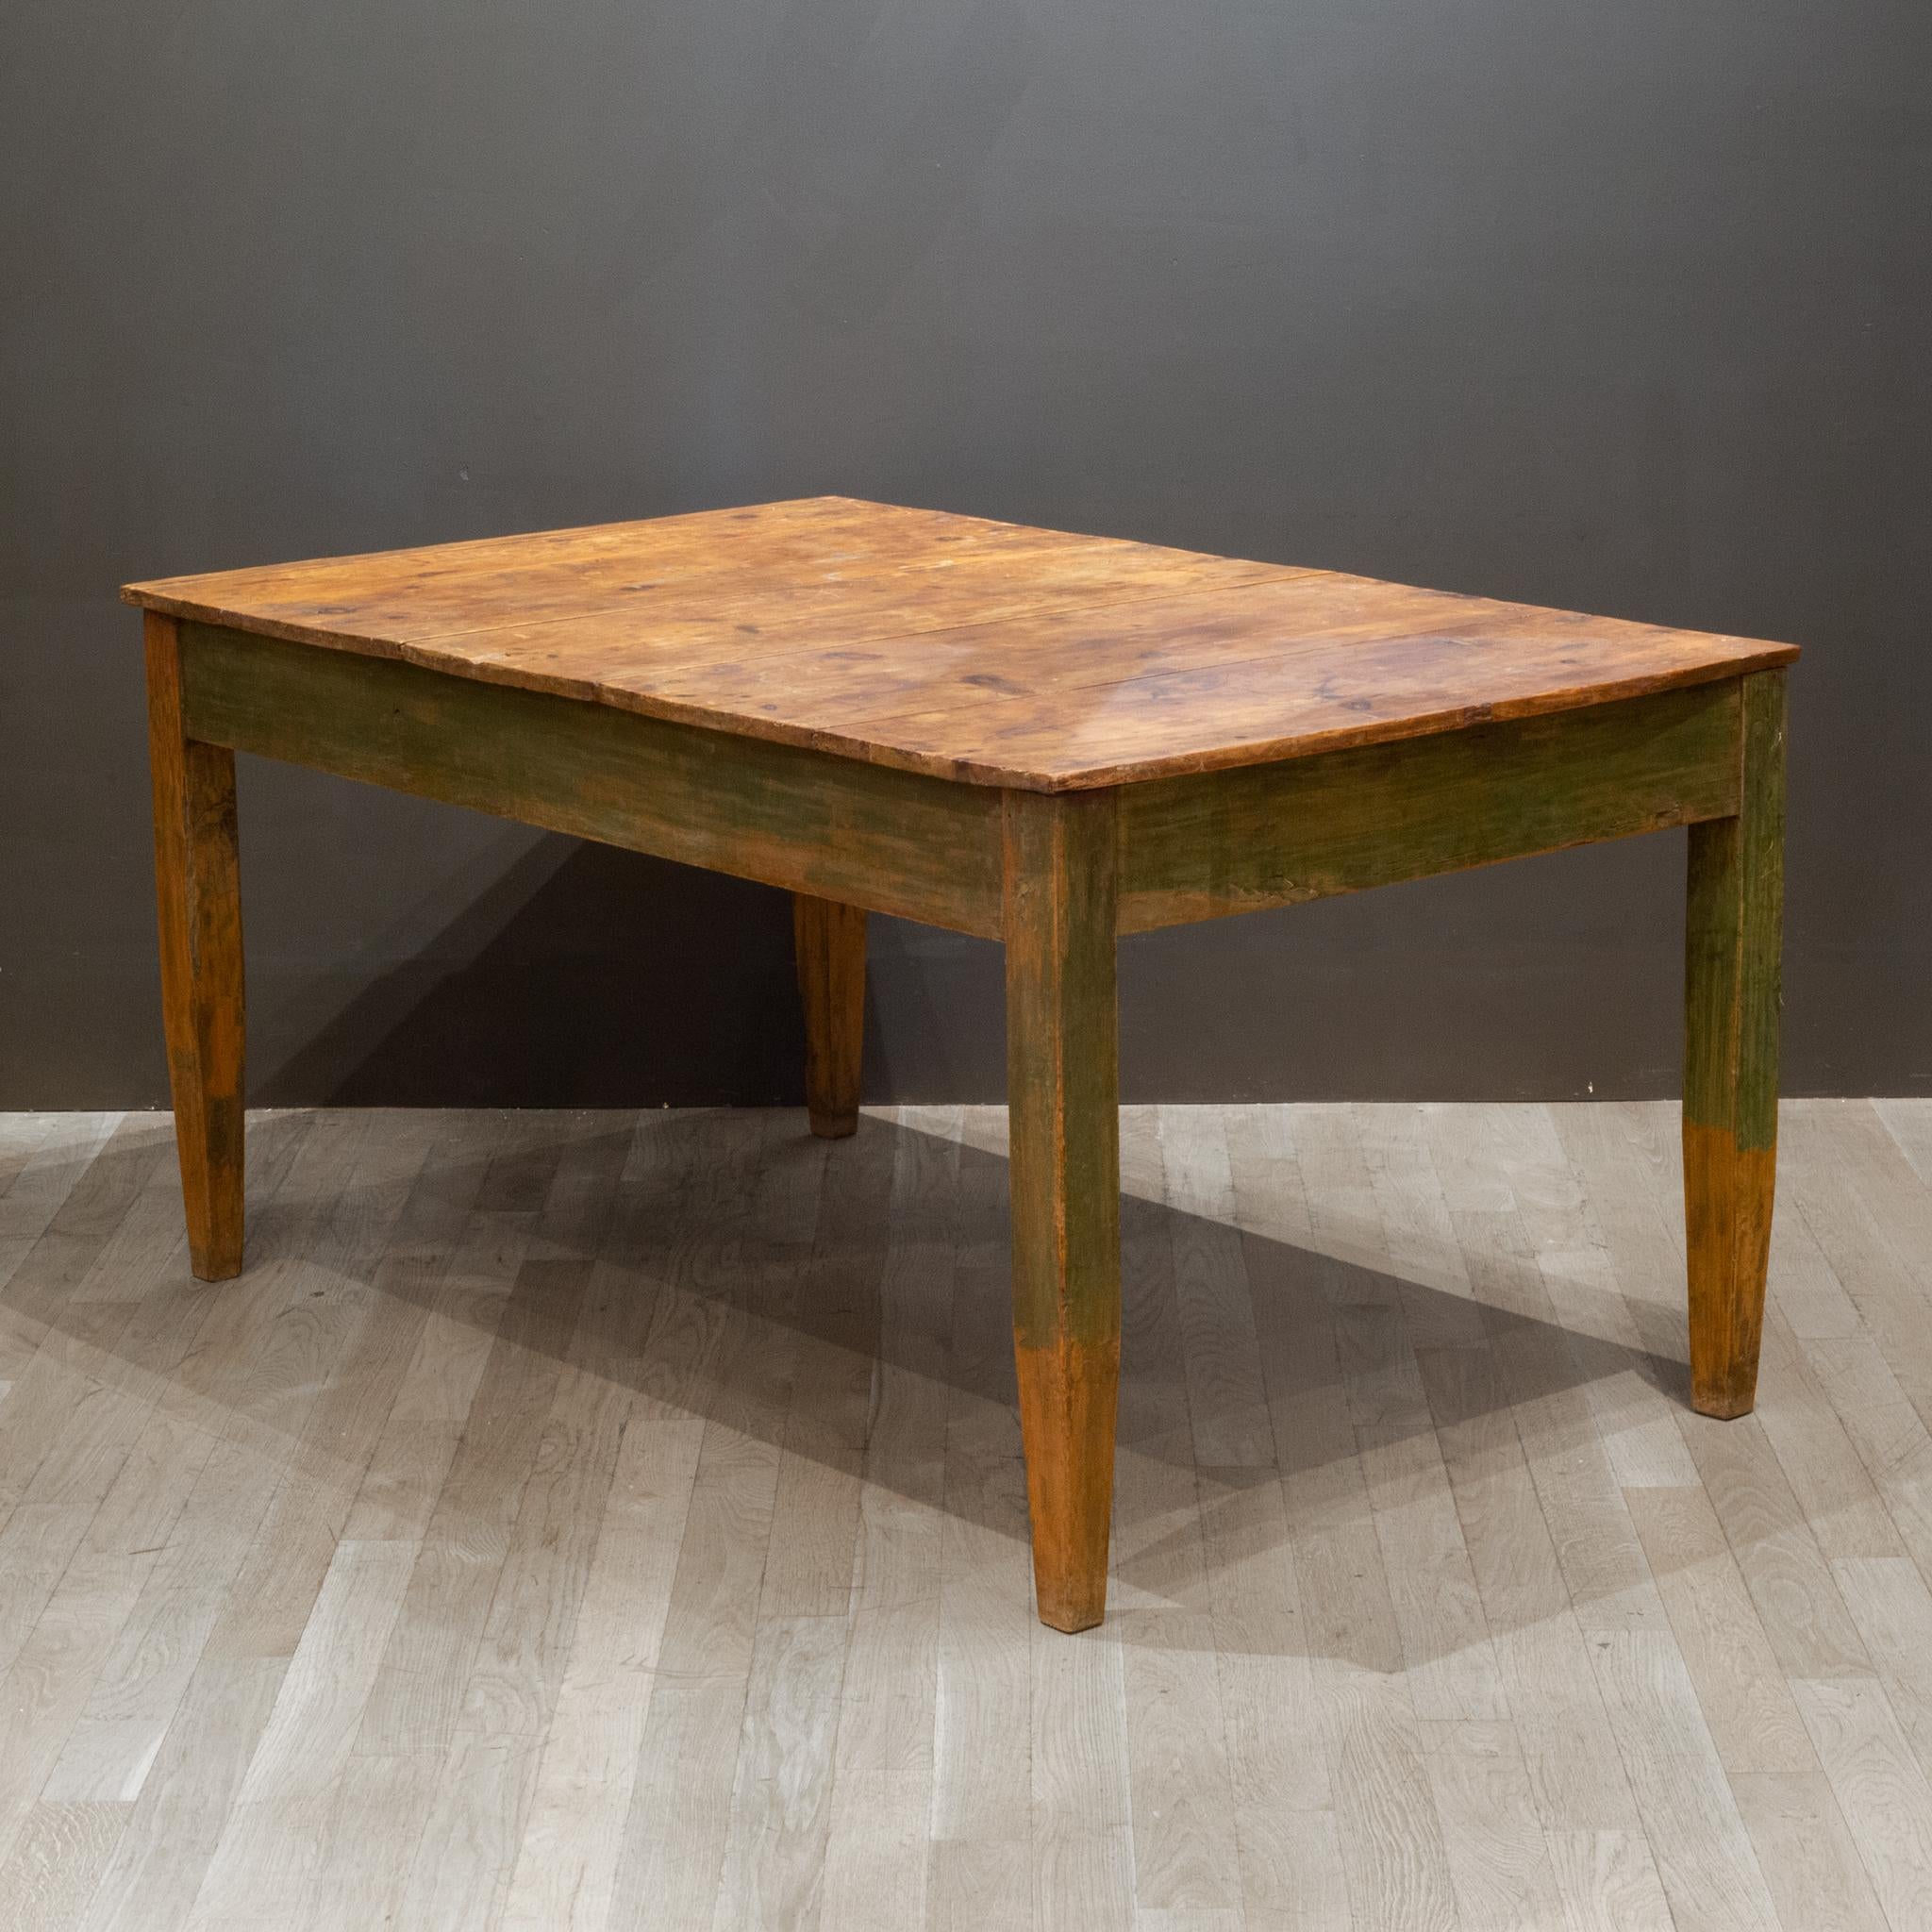 Rustic Mid 19th/Early 20th C. Primitive Farmhouse Table, c.1850-1920